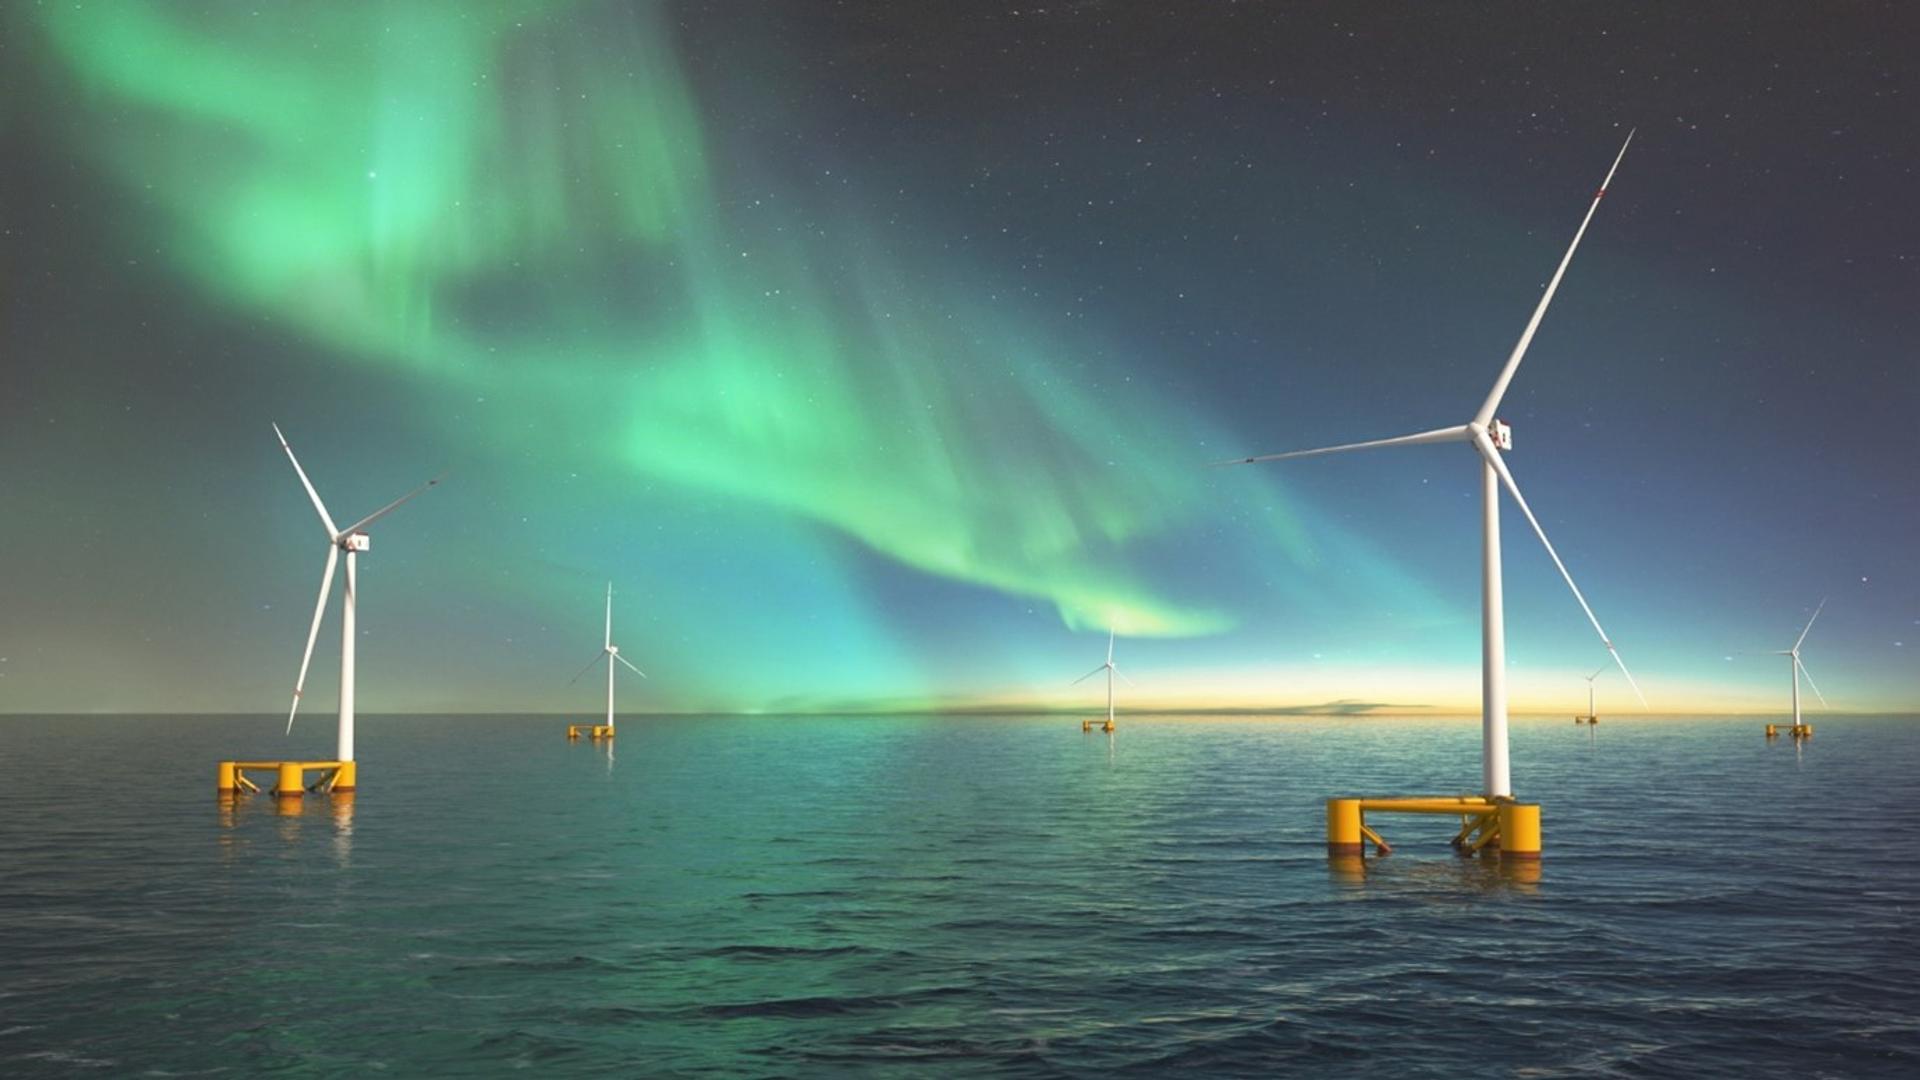 Illustration of floating wind turbines against the Northern Lights